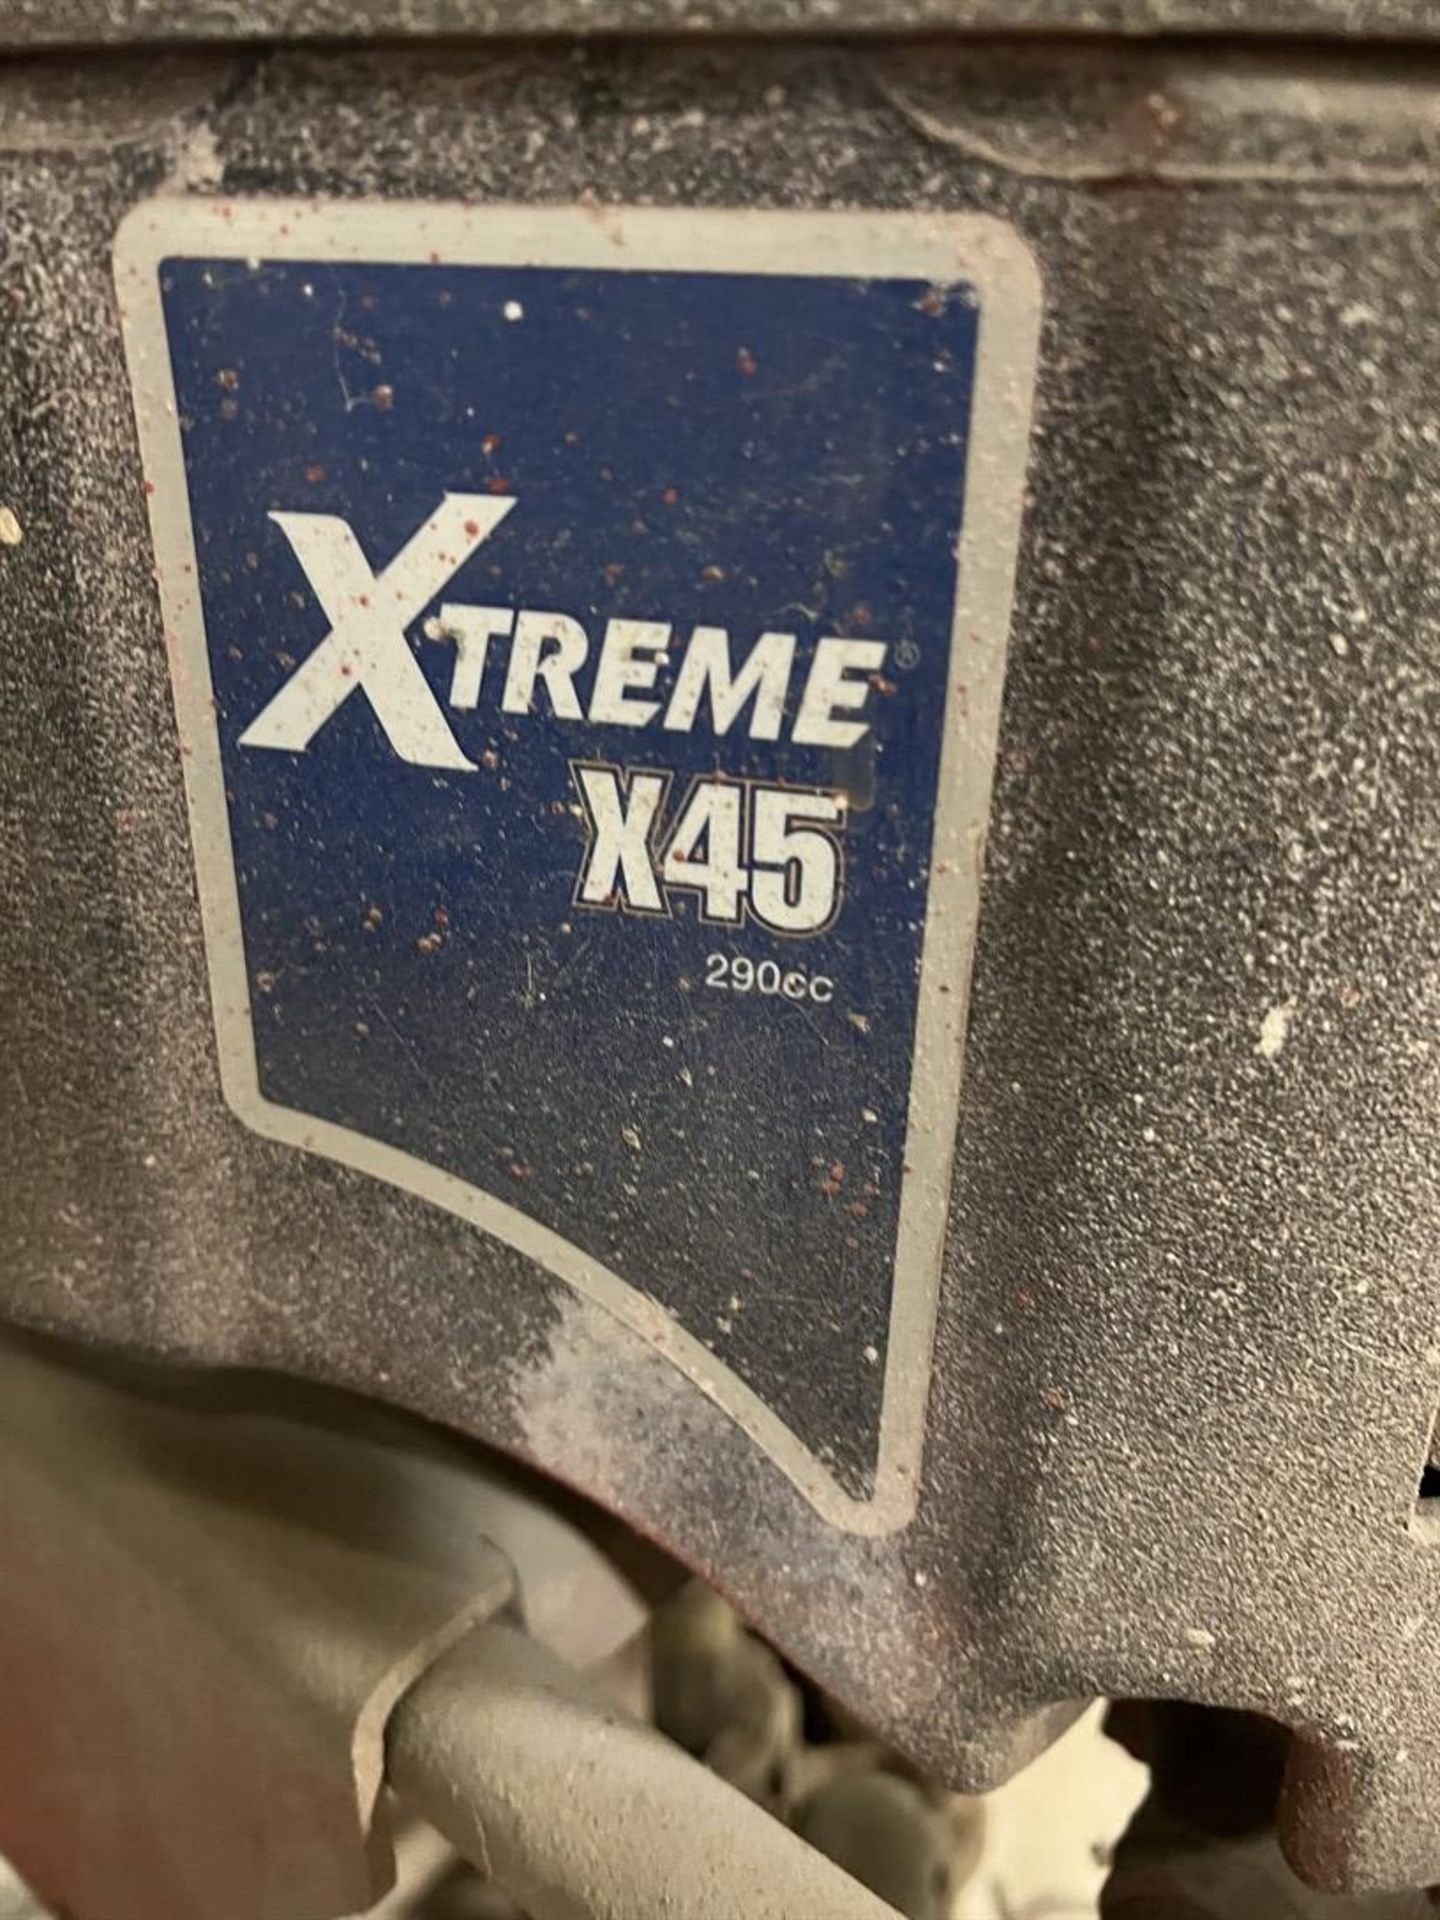 GRACO Xtreme X45 Paint Sprayer System, s/n A1618 - Image 3 of 5